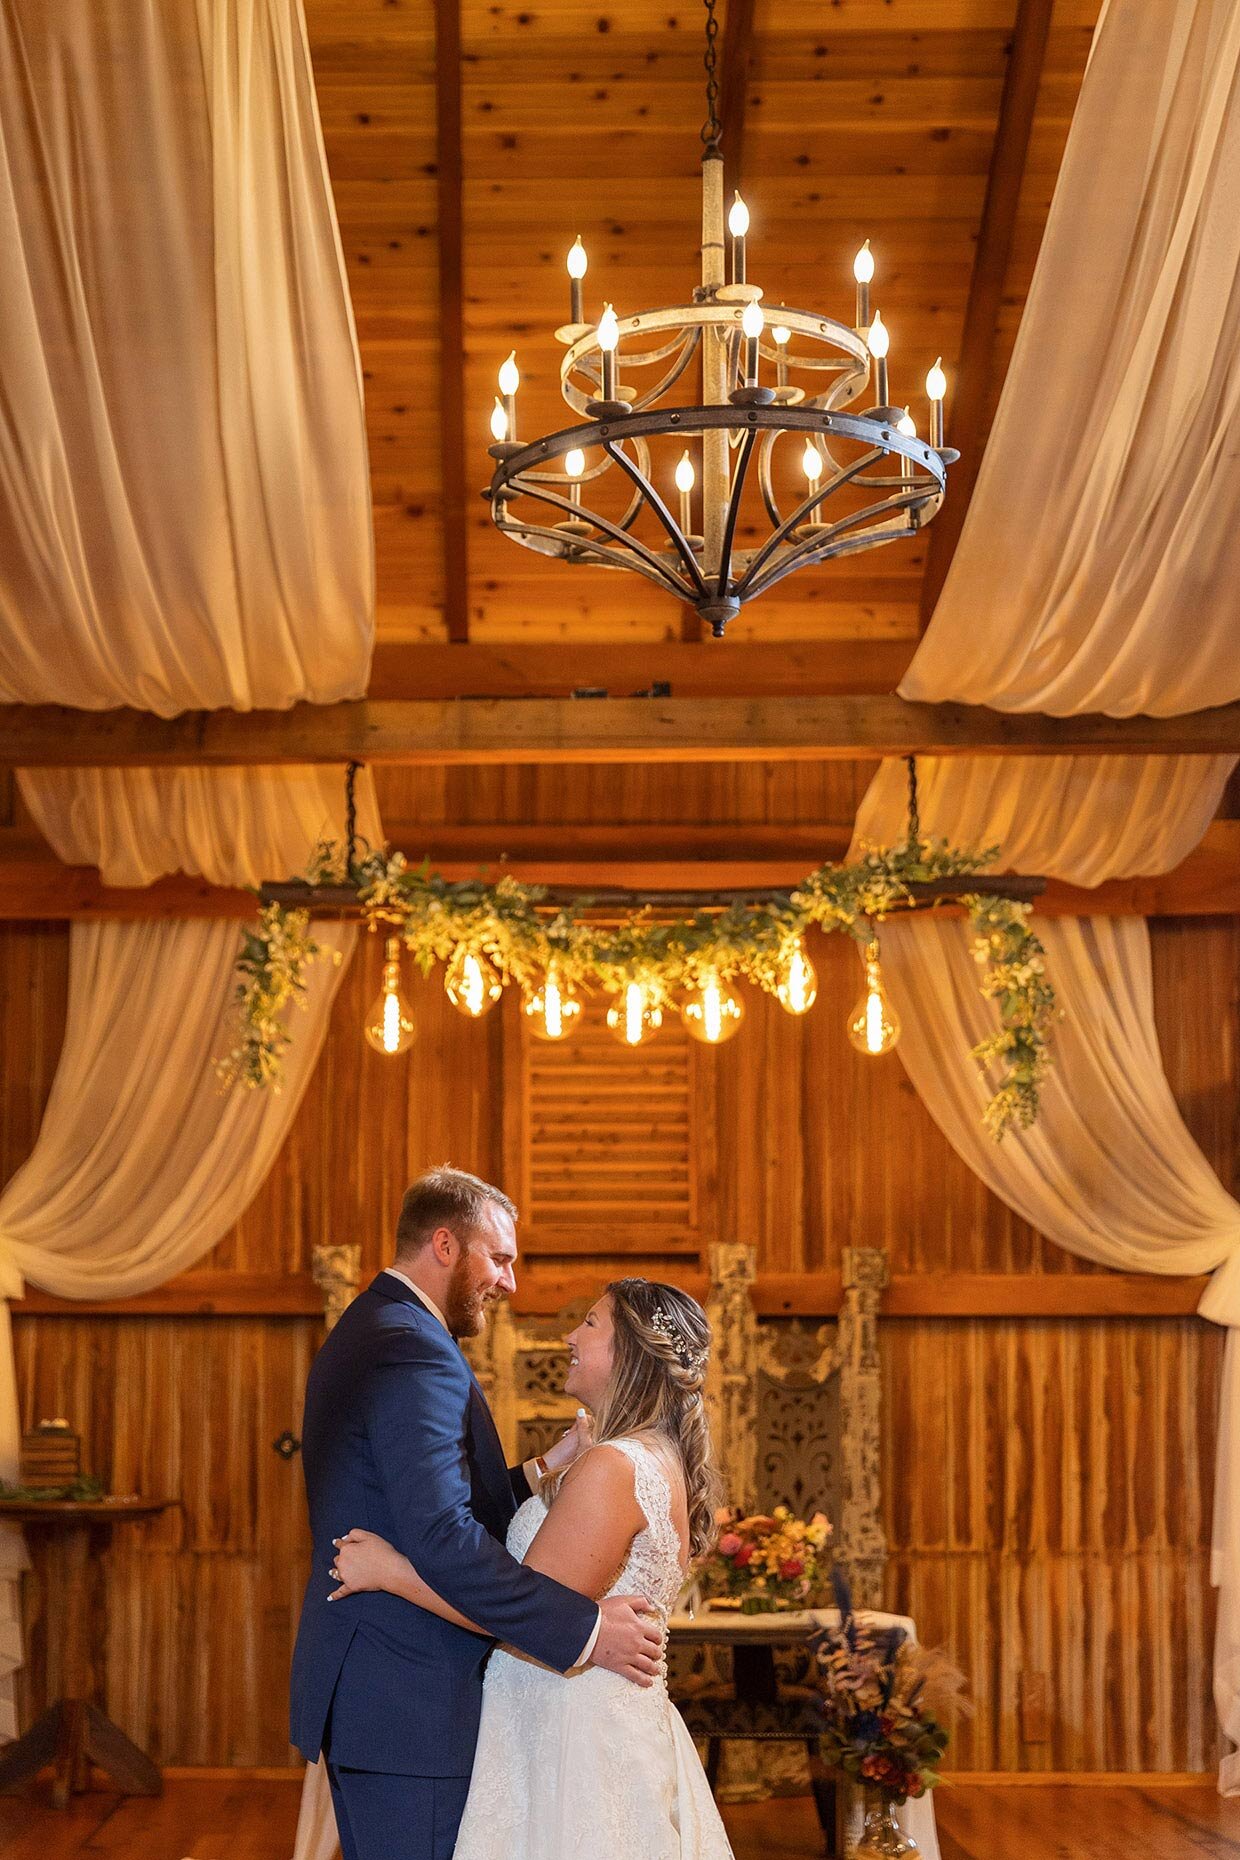 First dance as husband and wife in barn